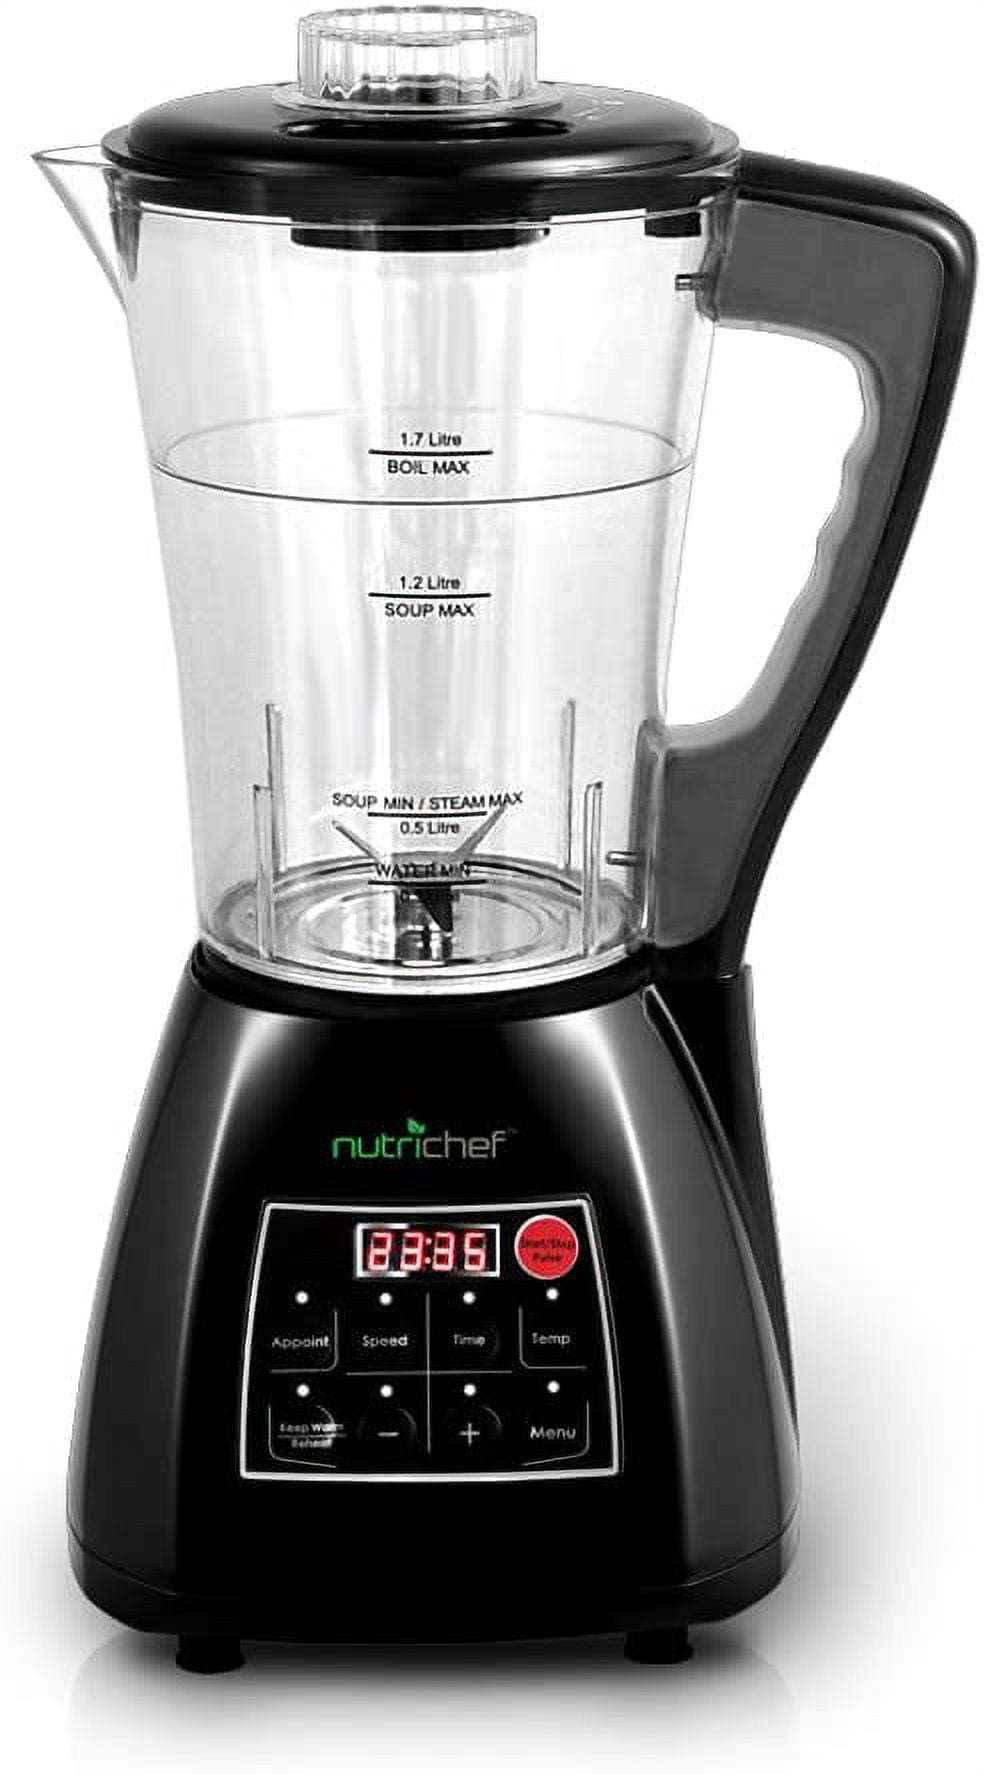 bathivy Soup Maker, Automatical Multi-Function Fresh Soup and Smoothie Make  Machine | 2 Liters, 6 Functions, Stainless Steel, LED Display | Blend